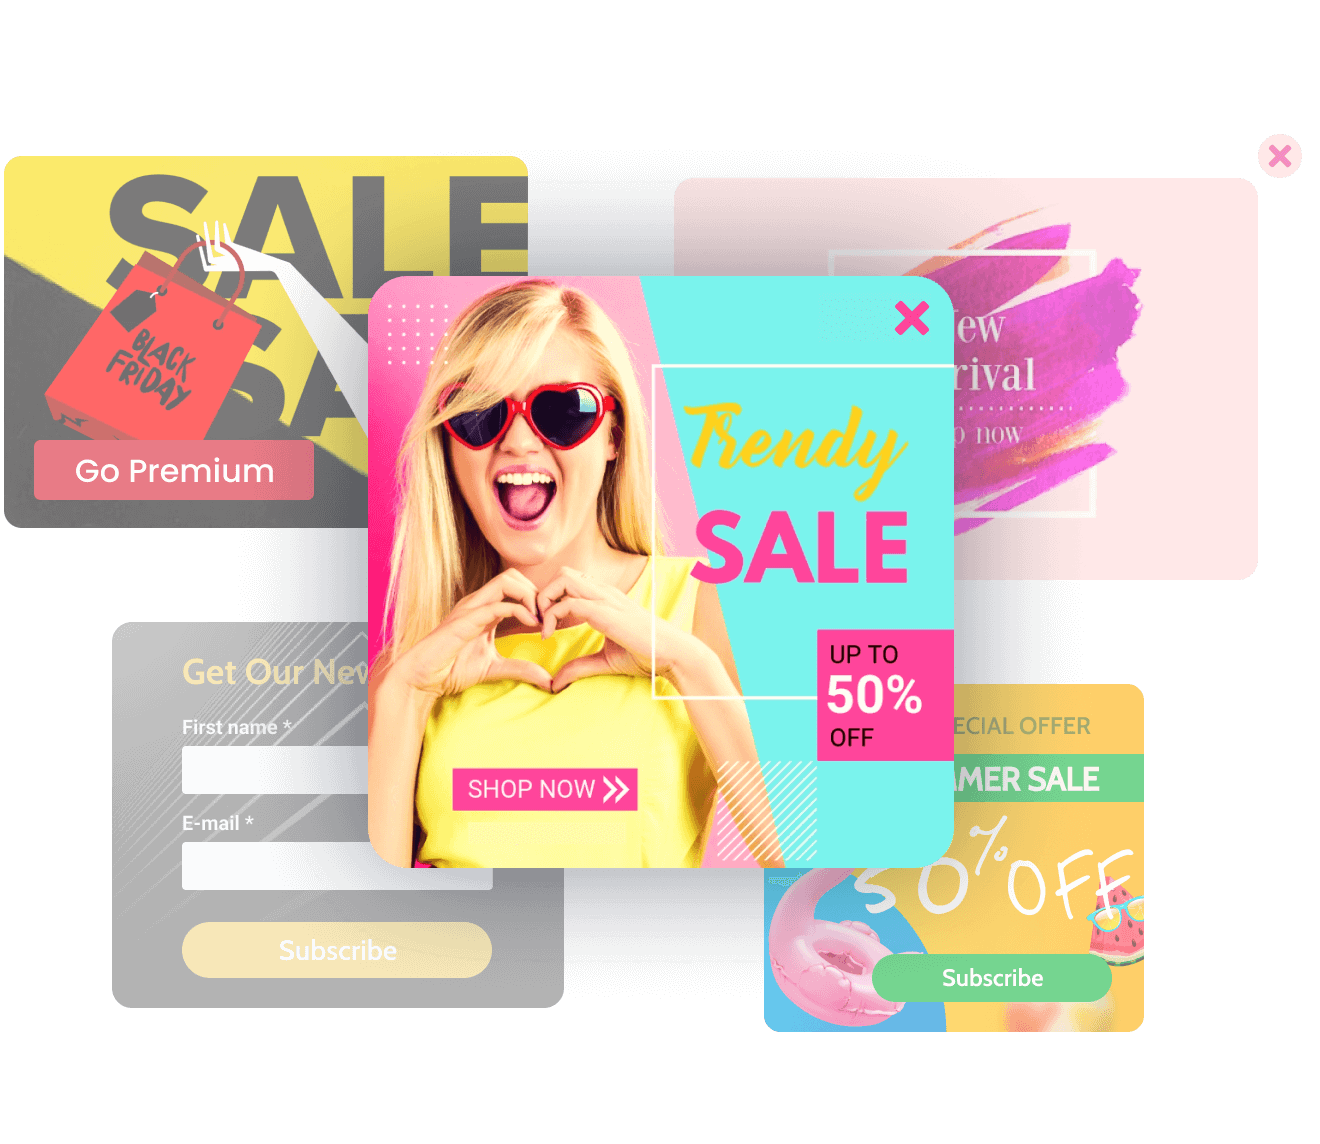 Colorful online sale advertisement with happy woman and discounts.